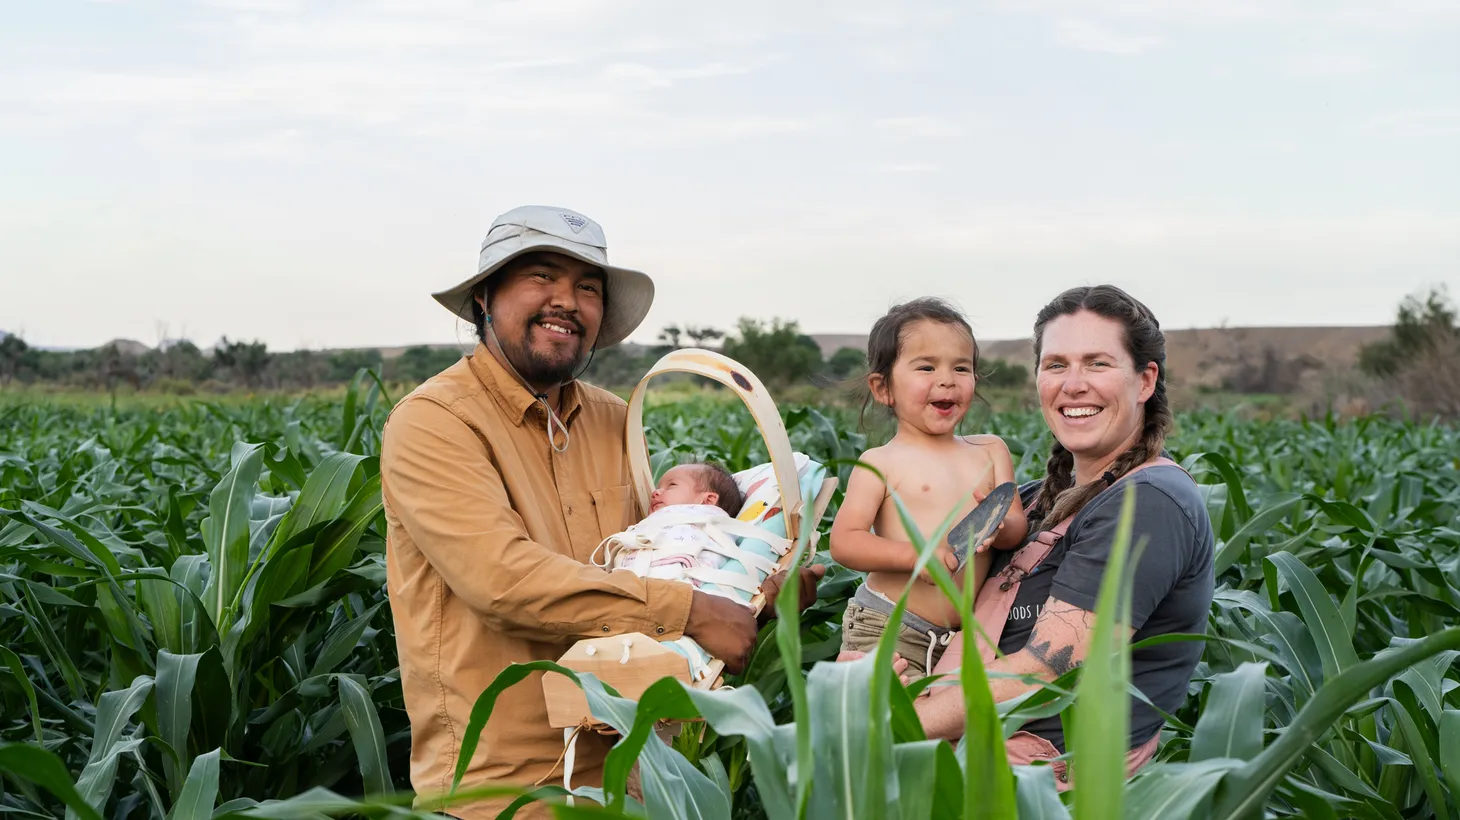 When Zachariah Ben and his wife Mary became pregnant with their son, they decided to cultivate the crops they were already growing to make Indigenous baby food.